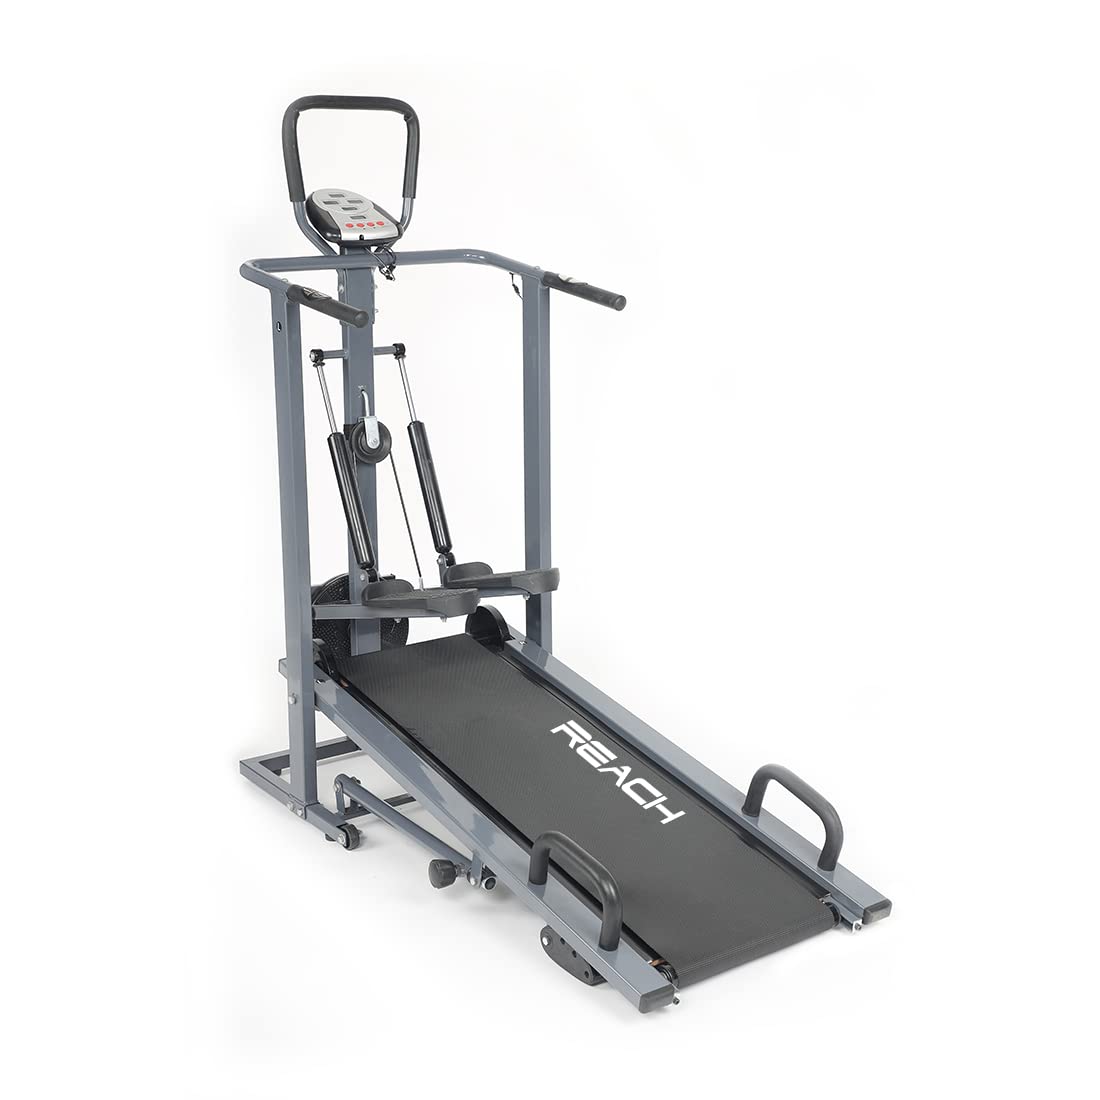 ELEV8 by Reach T-100 Manual Treadmill for Home Gym | 4 in 1 (Jogger, Twister, Stepper & Push-up bar) Foldable Treadmill | 3 Level Manual Incline | for Full Body Workouts | Max Weight 120 Kgs